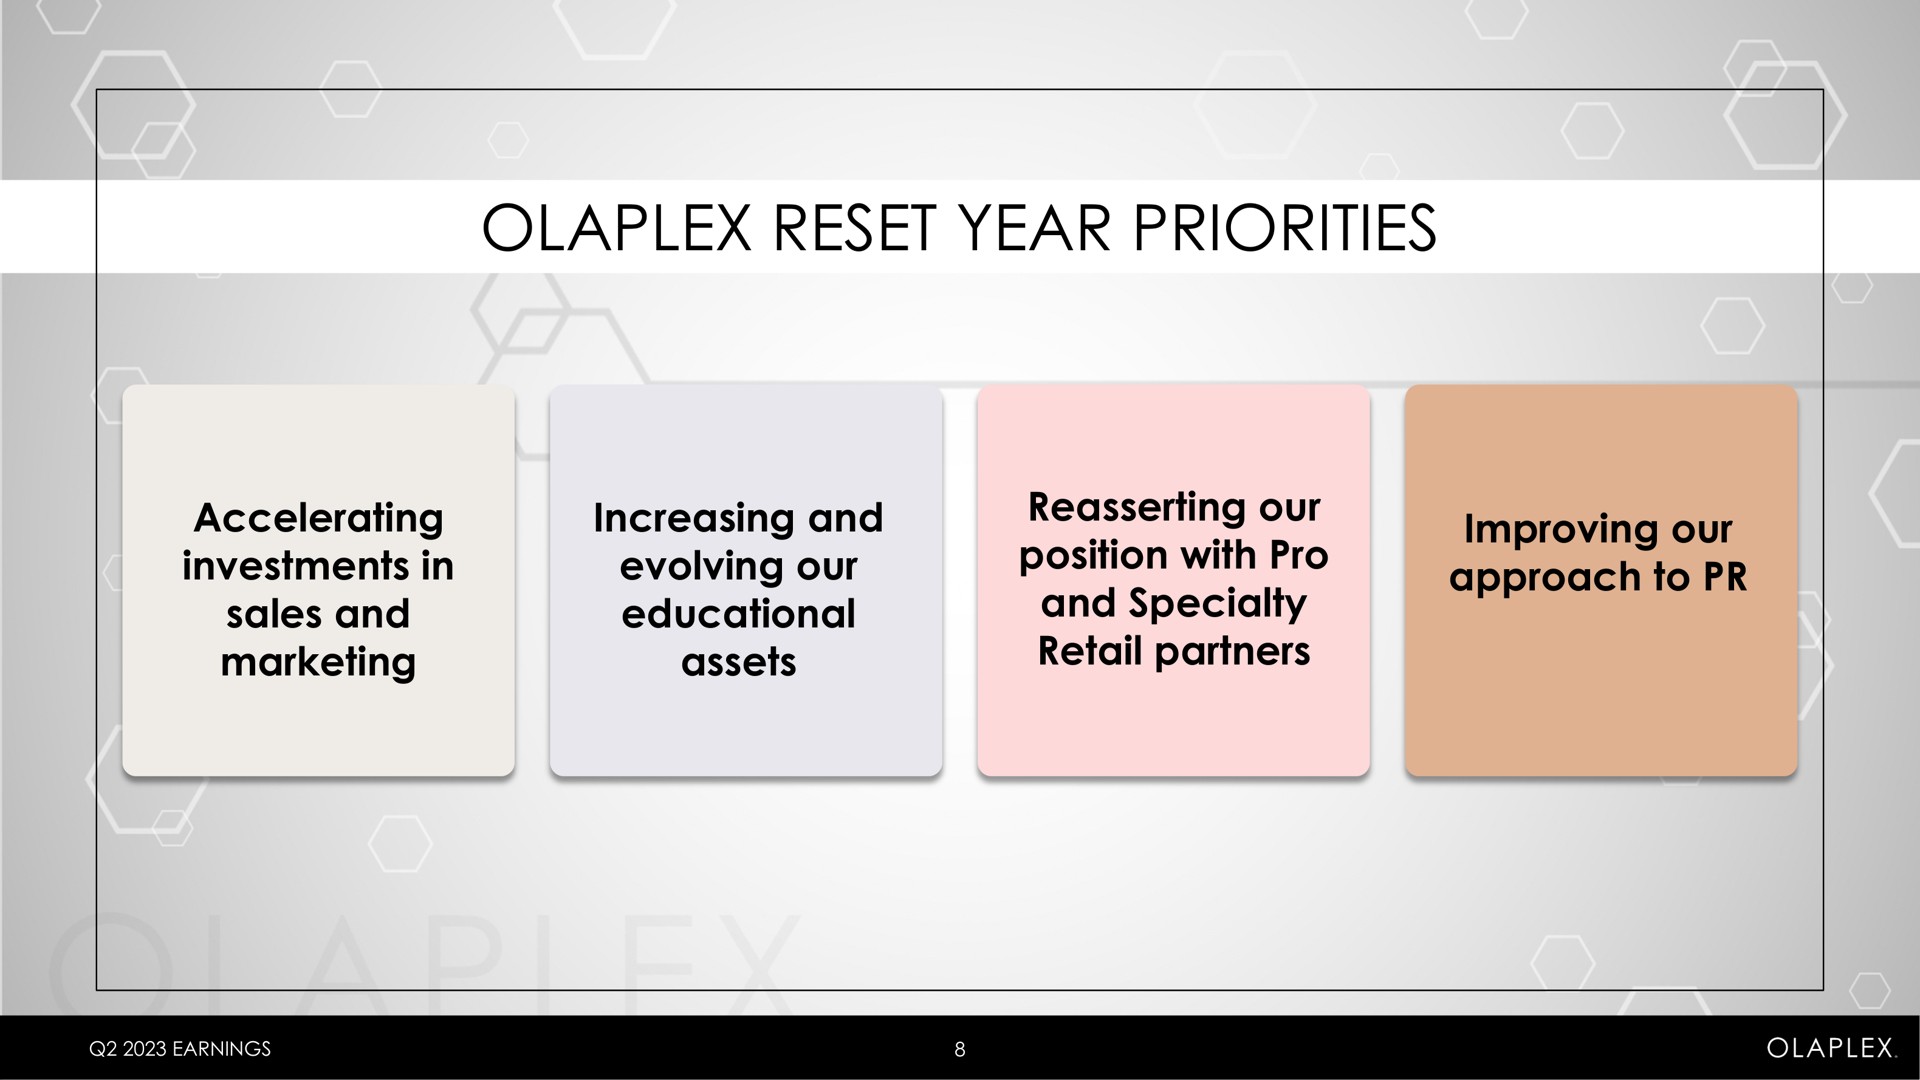 reset year priorities reasserting our position with pro and specialty accelerating investments in sales and increasing and evolving our educational | Olaplex